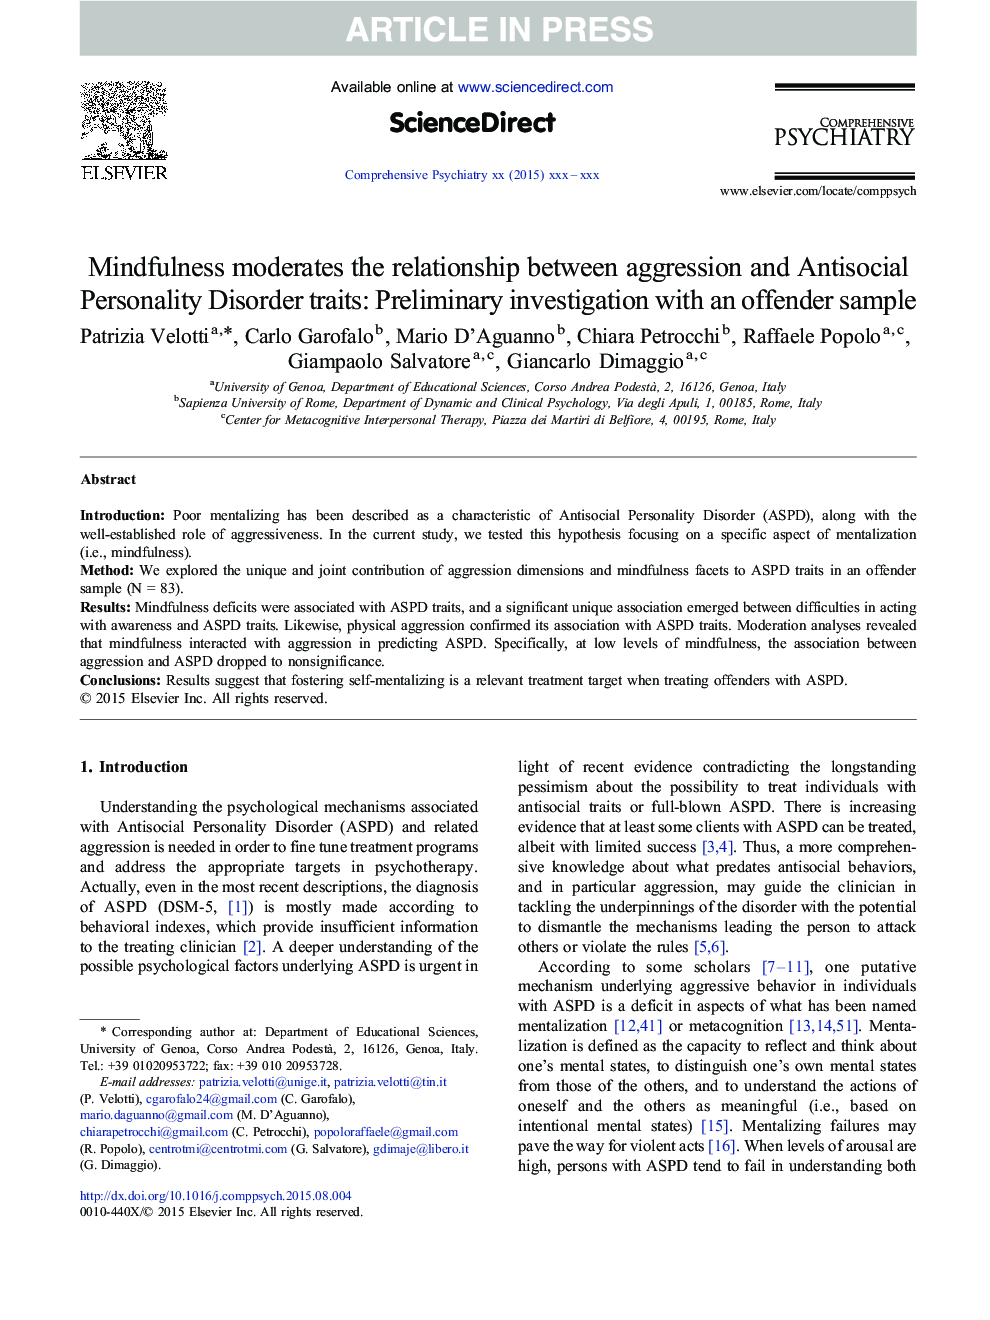 Mindfulness moderates the relationship between aggression and Antisocial Personality Disorder traits: Preliminary investigation with an offender sample